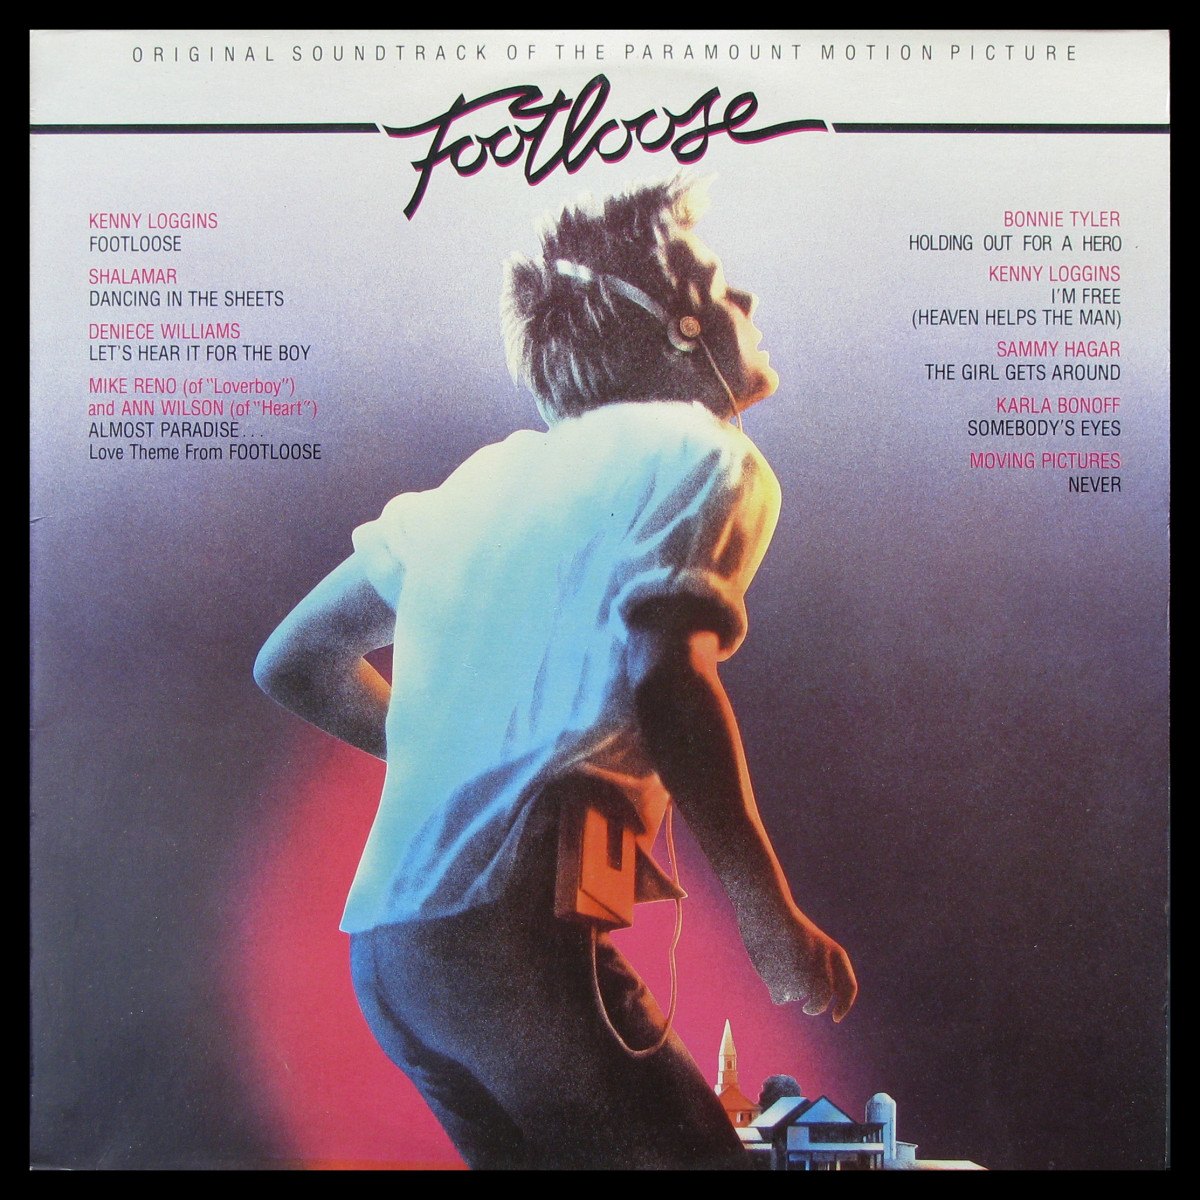 LP V/A — Footloose (Original Soundtrack Of The Paramount Motion Picture) фото